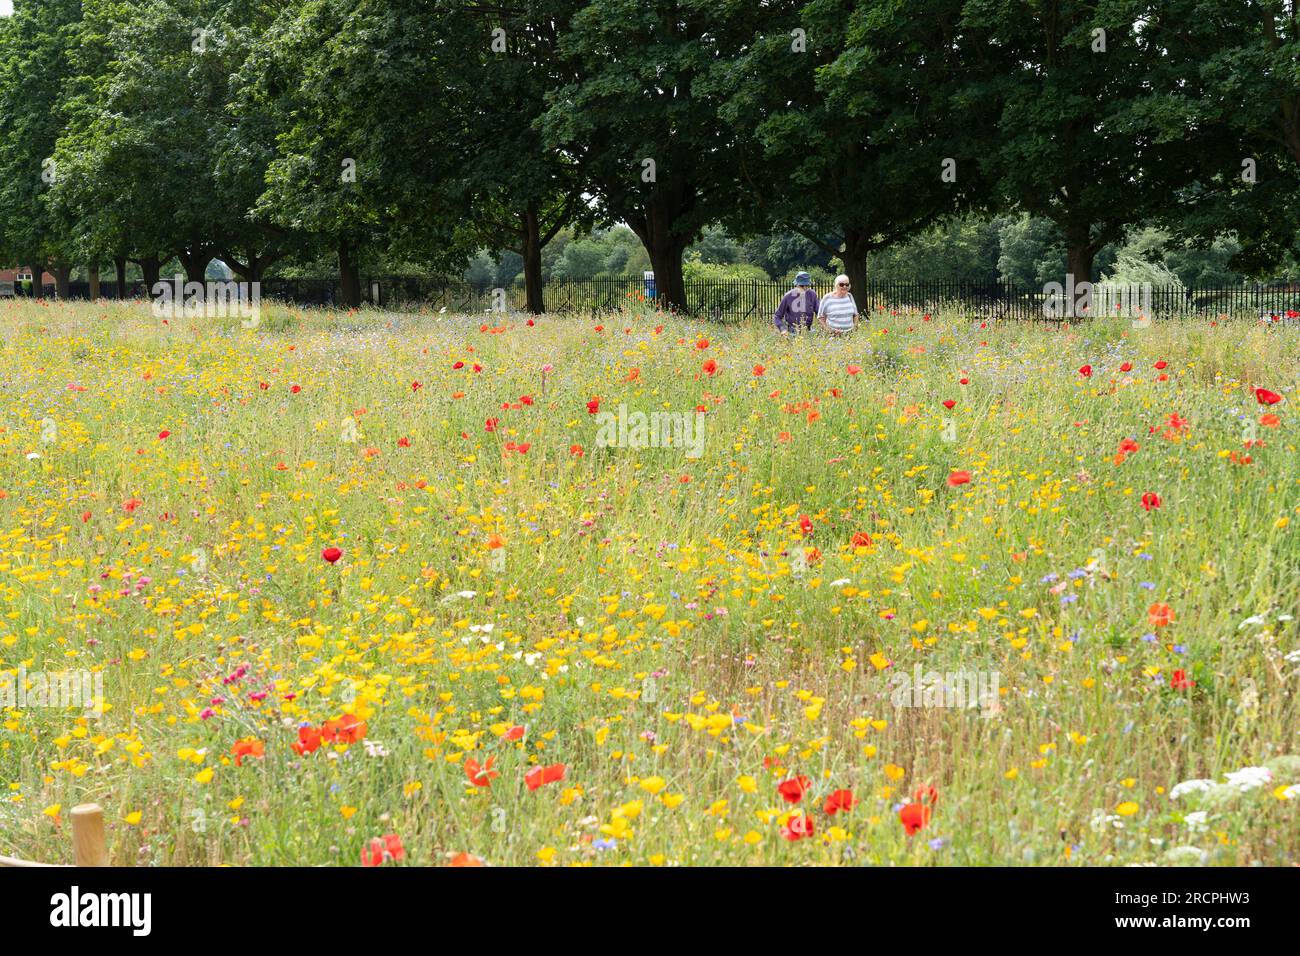 People walking through a wildflower meadow planted with red poppies, cornflowers and California poppies outside Hampton Court Palace, London, UK Stock Photo